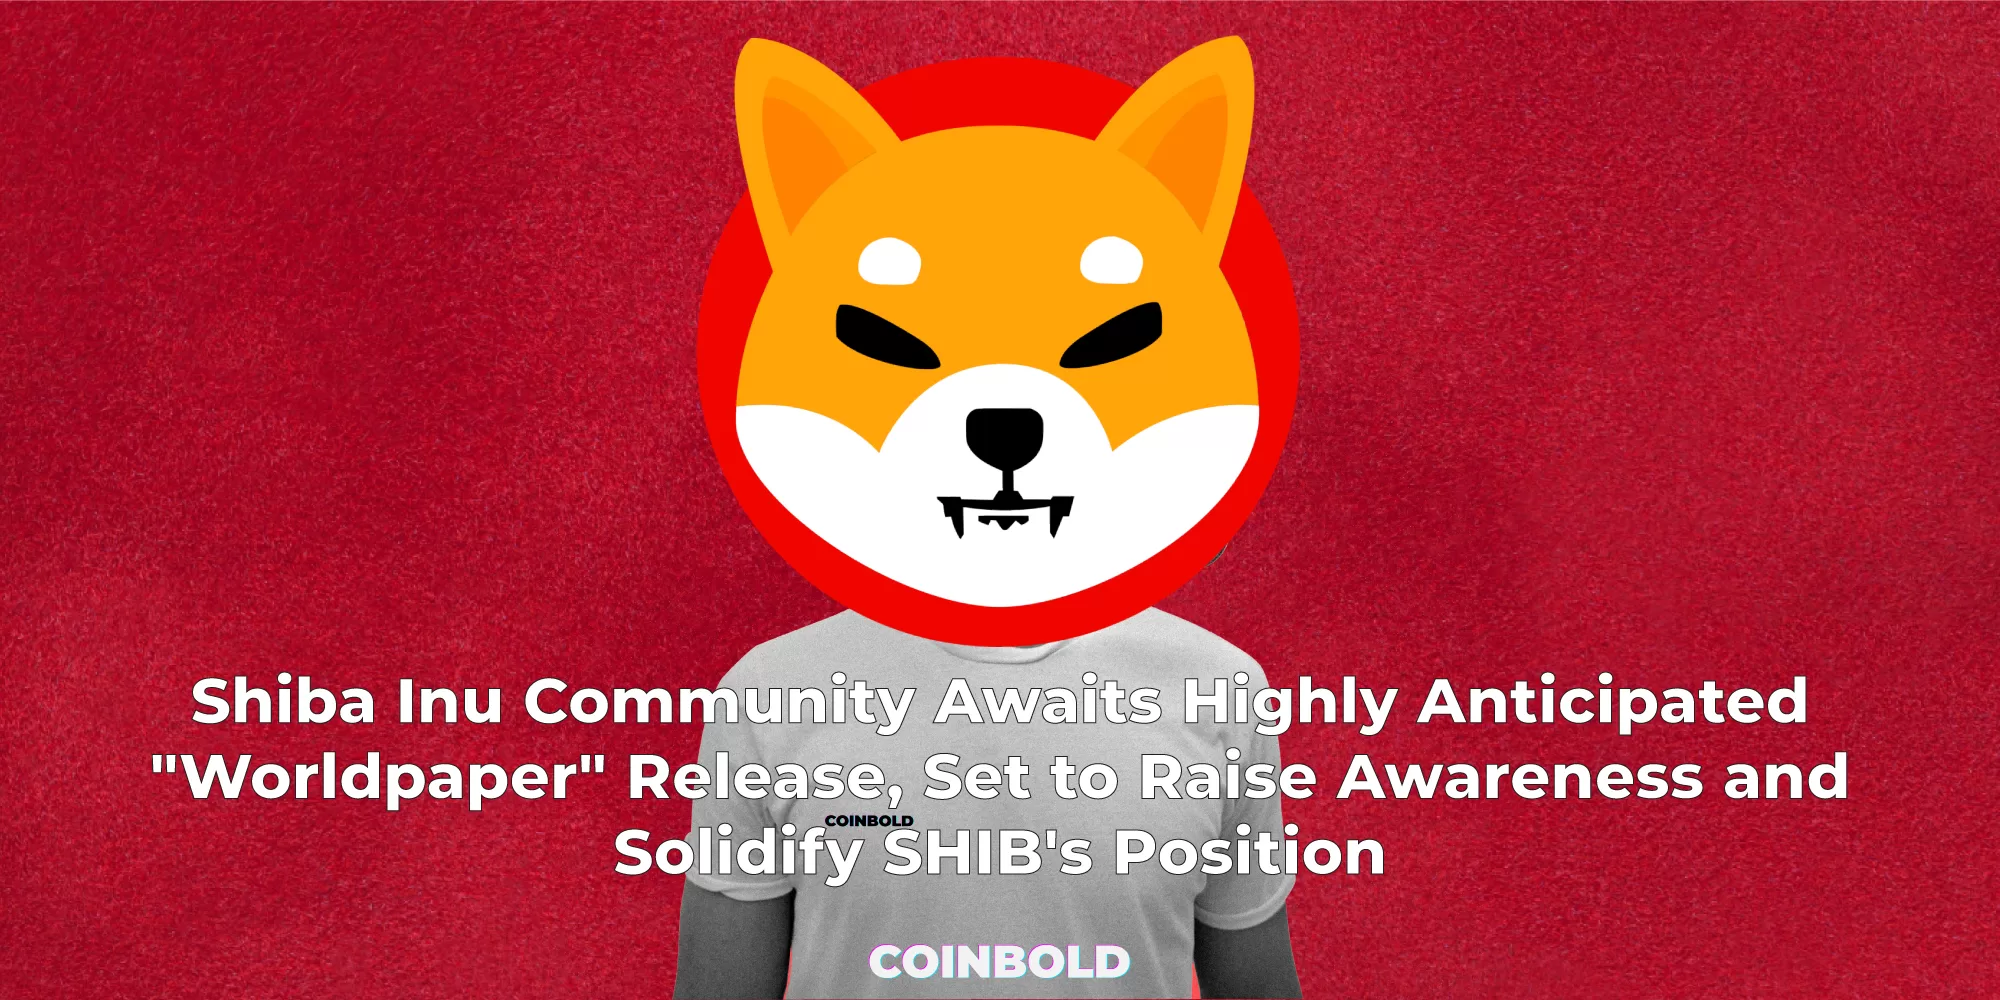 Shiba Inu Community Awaits Highly Anticipated "Worldpaper" Release, Set to Raise Awareness and Solidify SHIB's Position